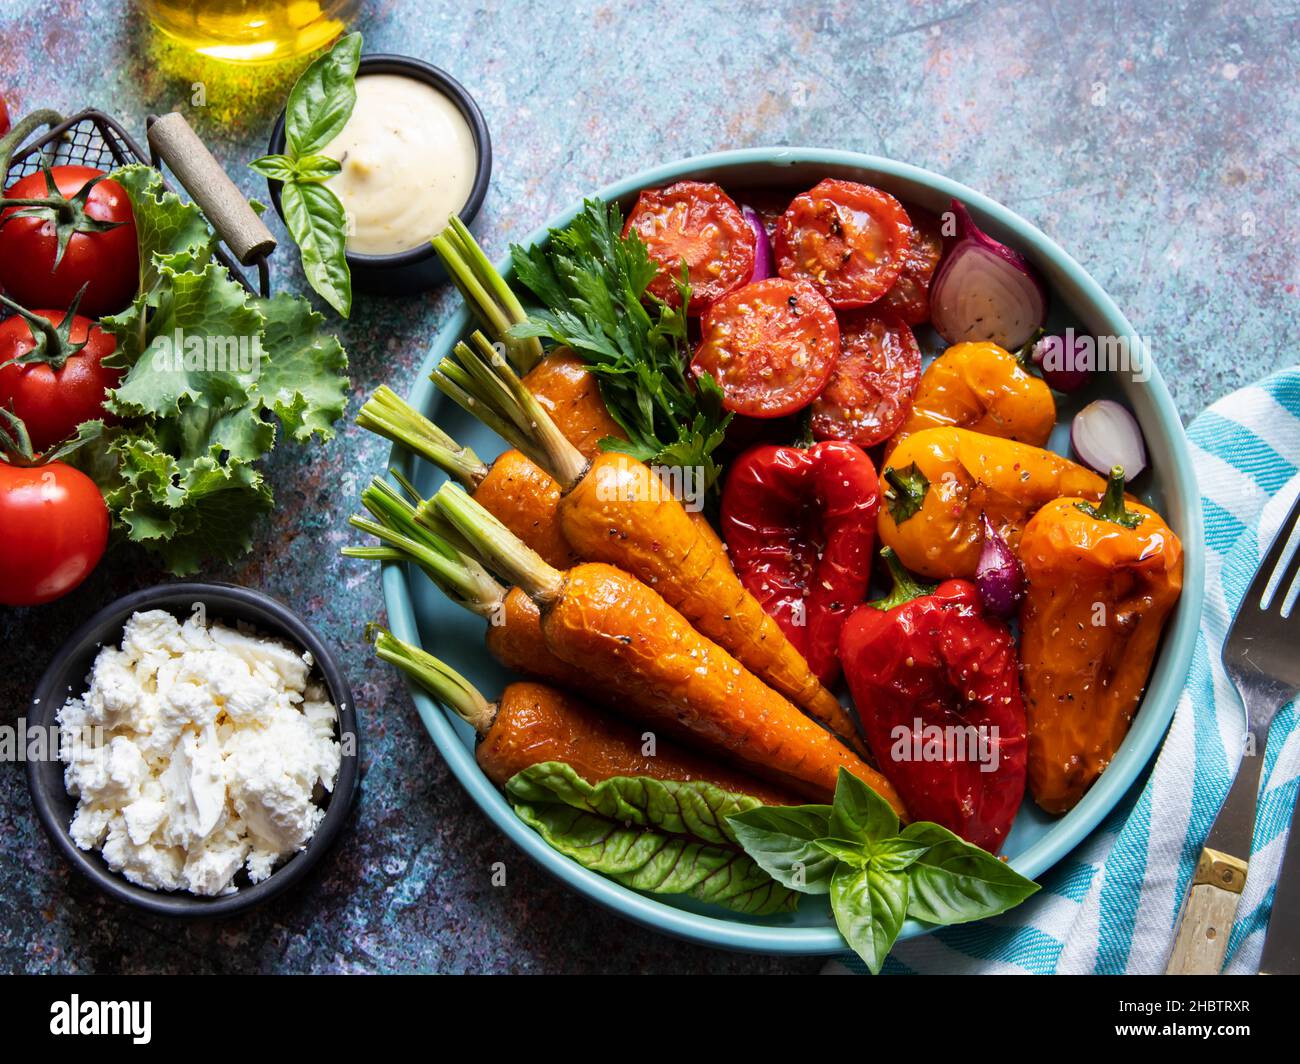 baked grill baby carrots, tomato, bell pepper in a plate, basil and spices vegan dish, close up, white sauce, goat cheese Stock Photo